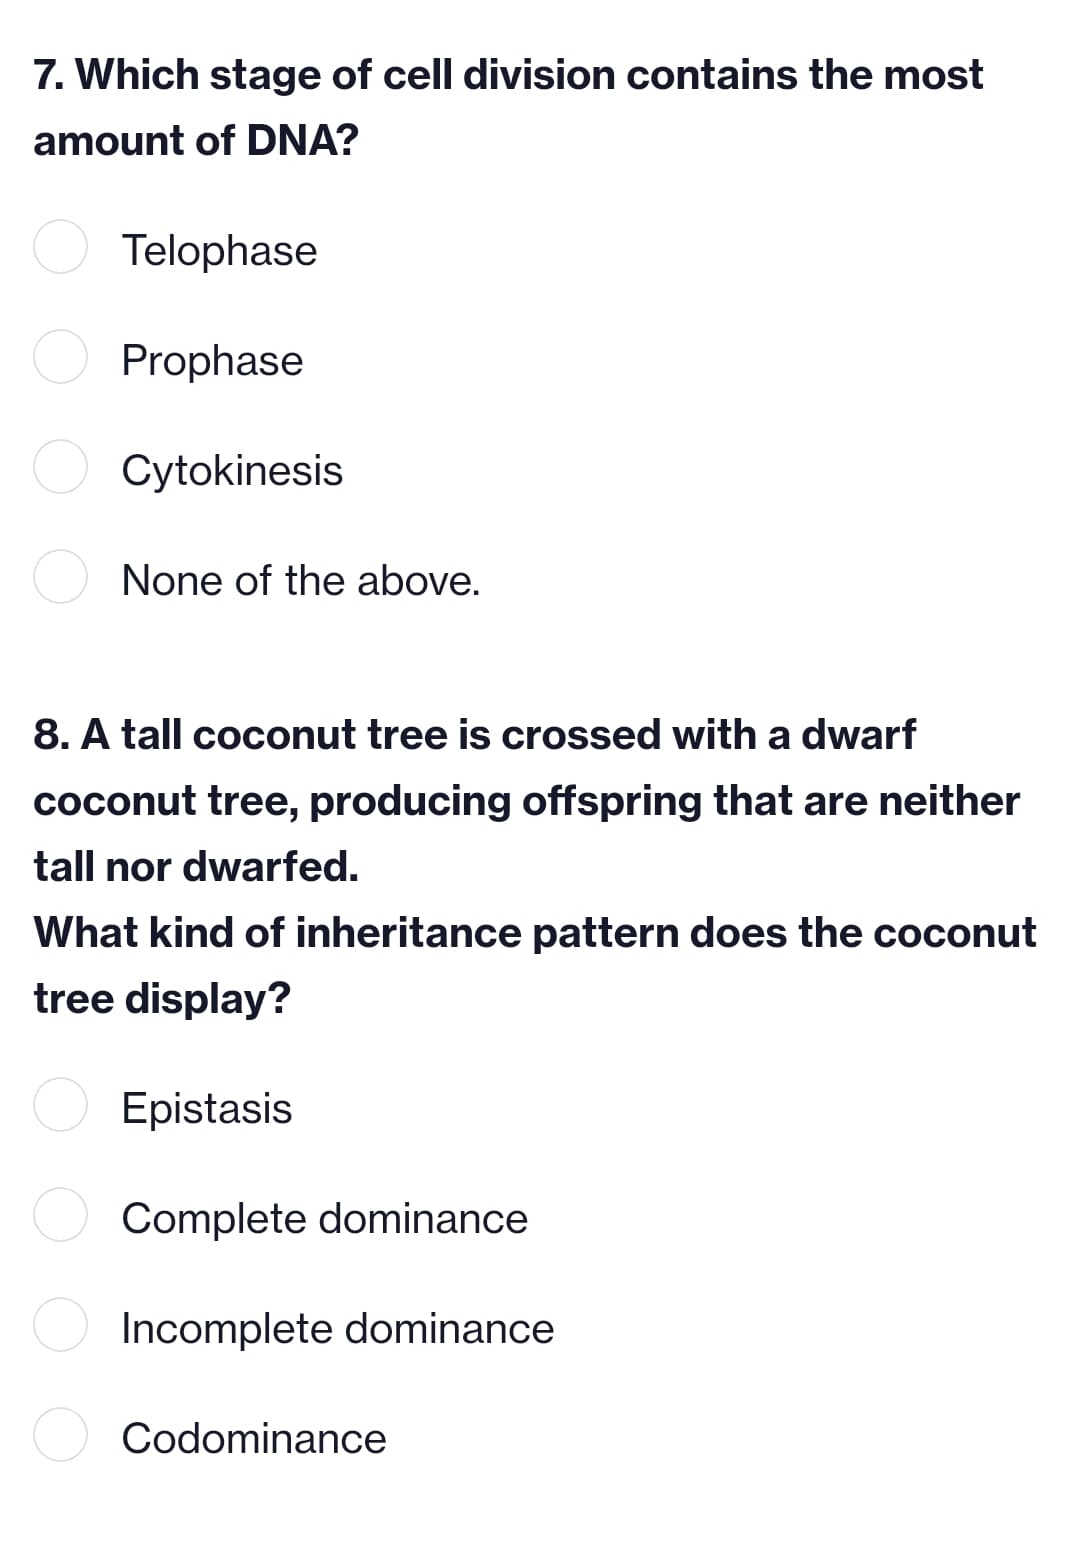 7. Which stage of cell division contains the most
amount of DNA?
Telophase
Prophase
Cytokinesis
None of the above.
8. A tall coconut tree is crossed with a dwarf
coconut tree, producing offspring that are neither
tall nor dwarfed.
What kind of inheritance pattern does the coconut
tree display?
Epistasis
Complete dominance
Incomplete dominance
Codominance